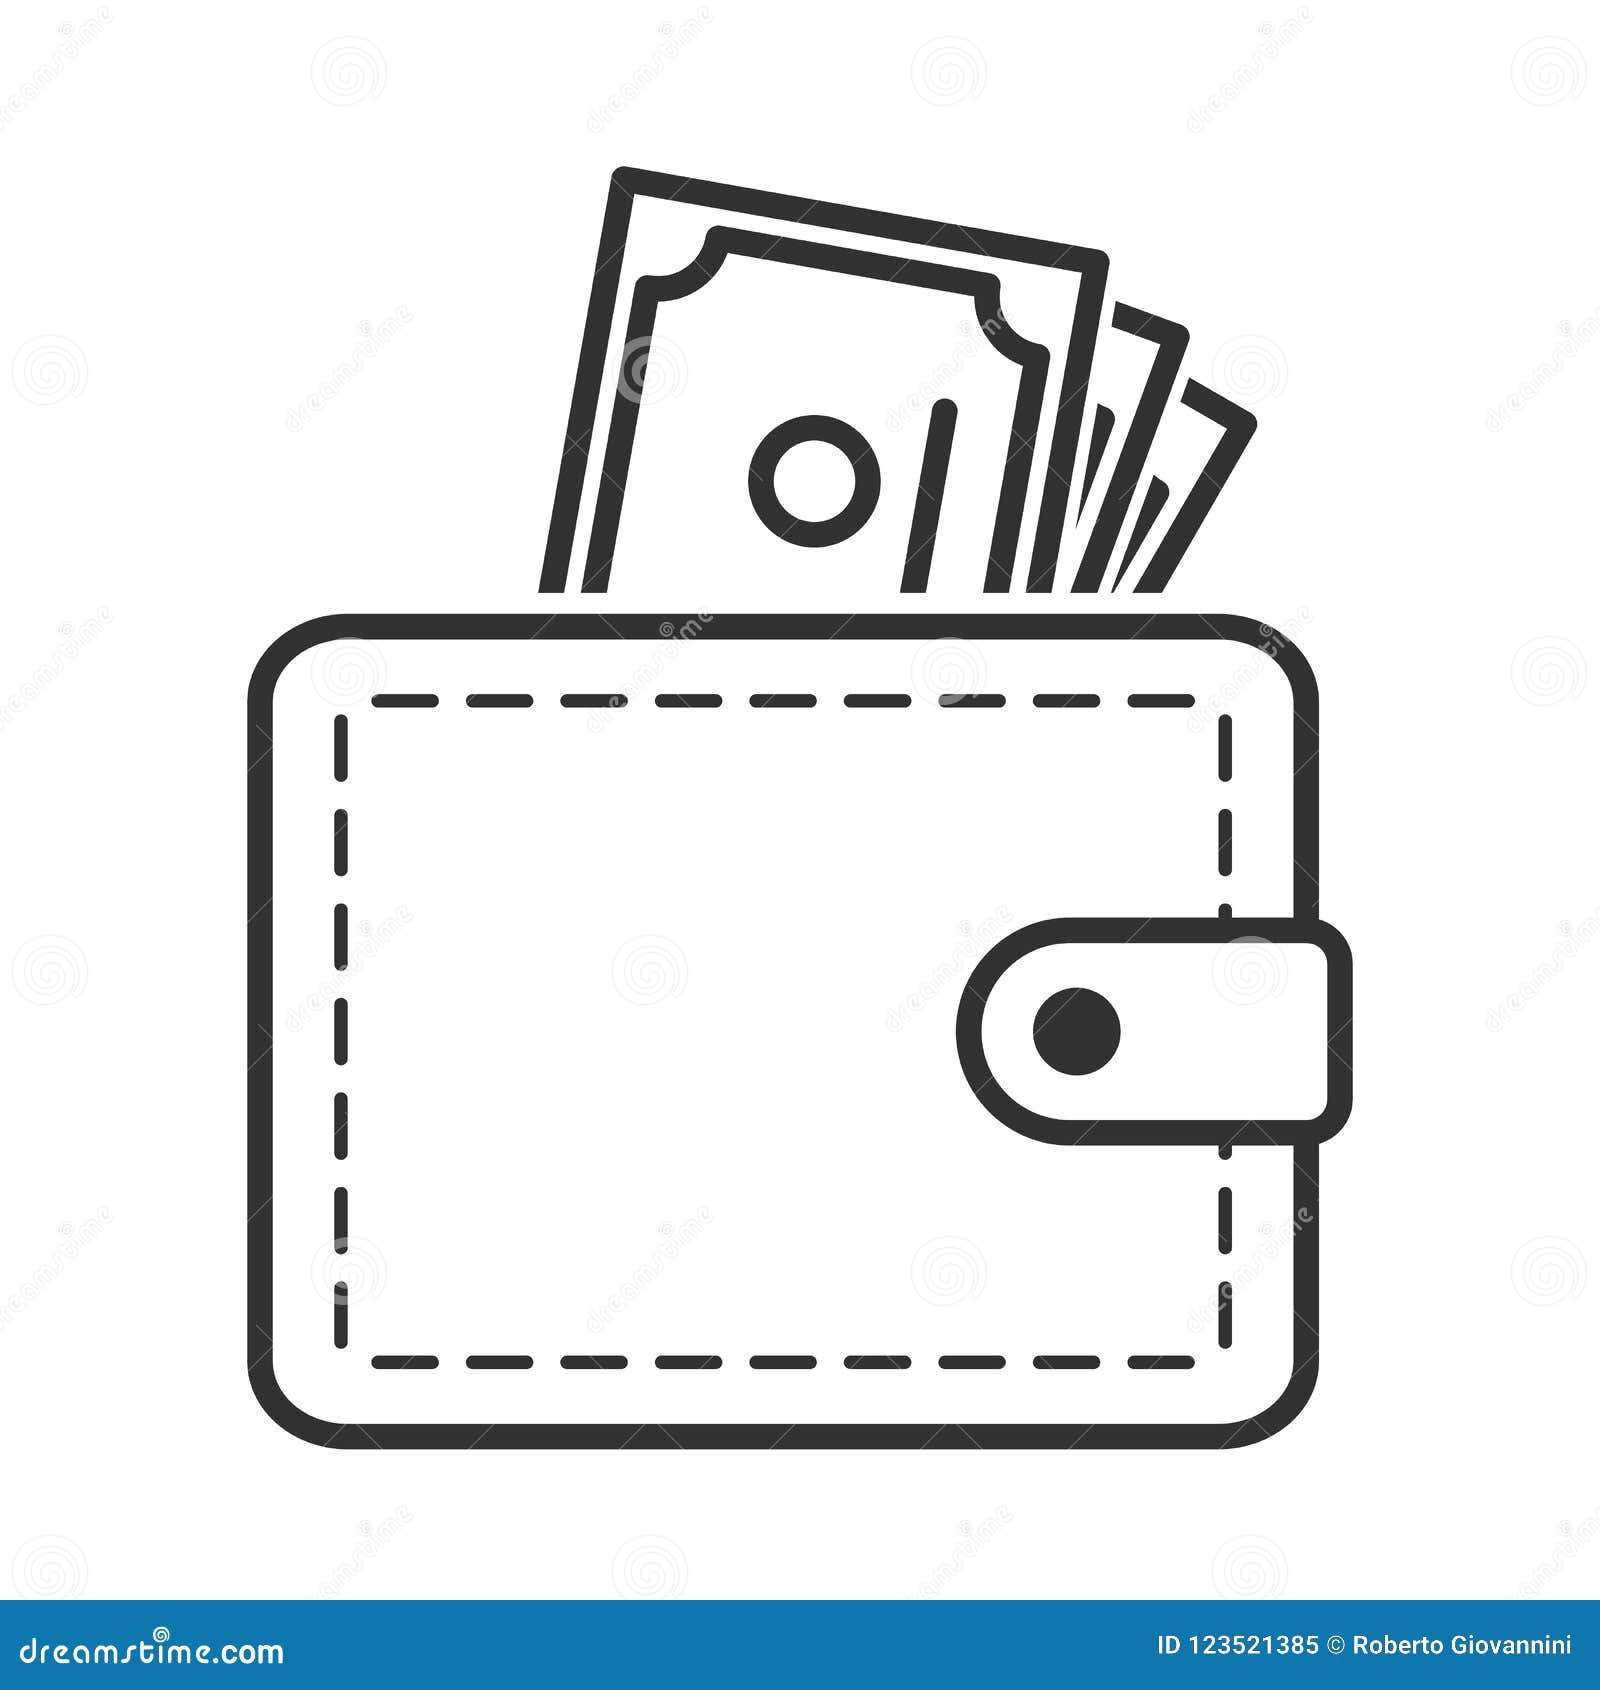 wallet and banknotes outline flat icon